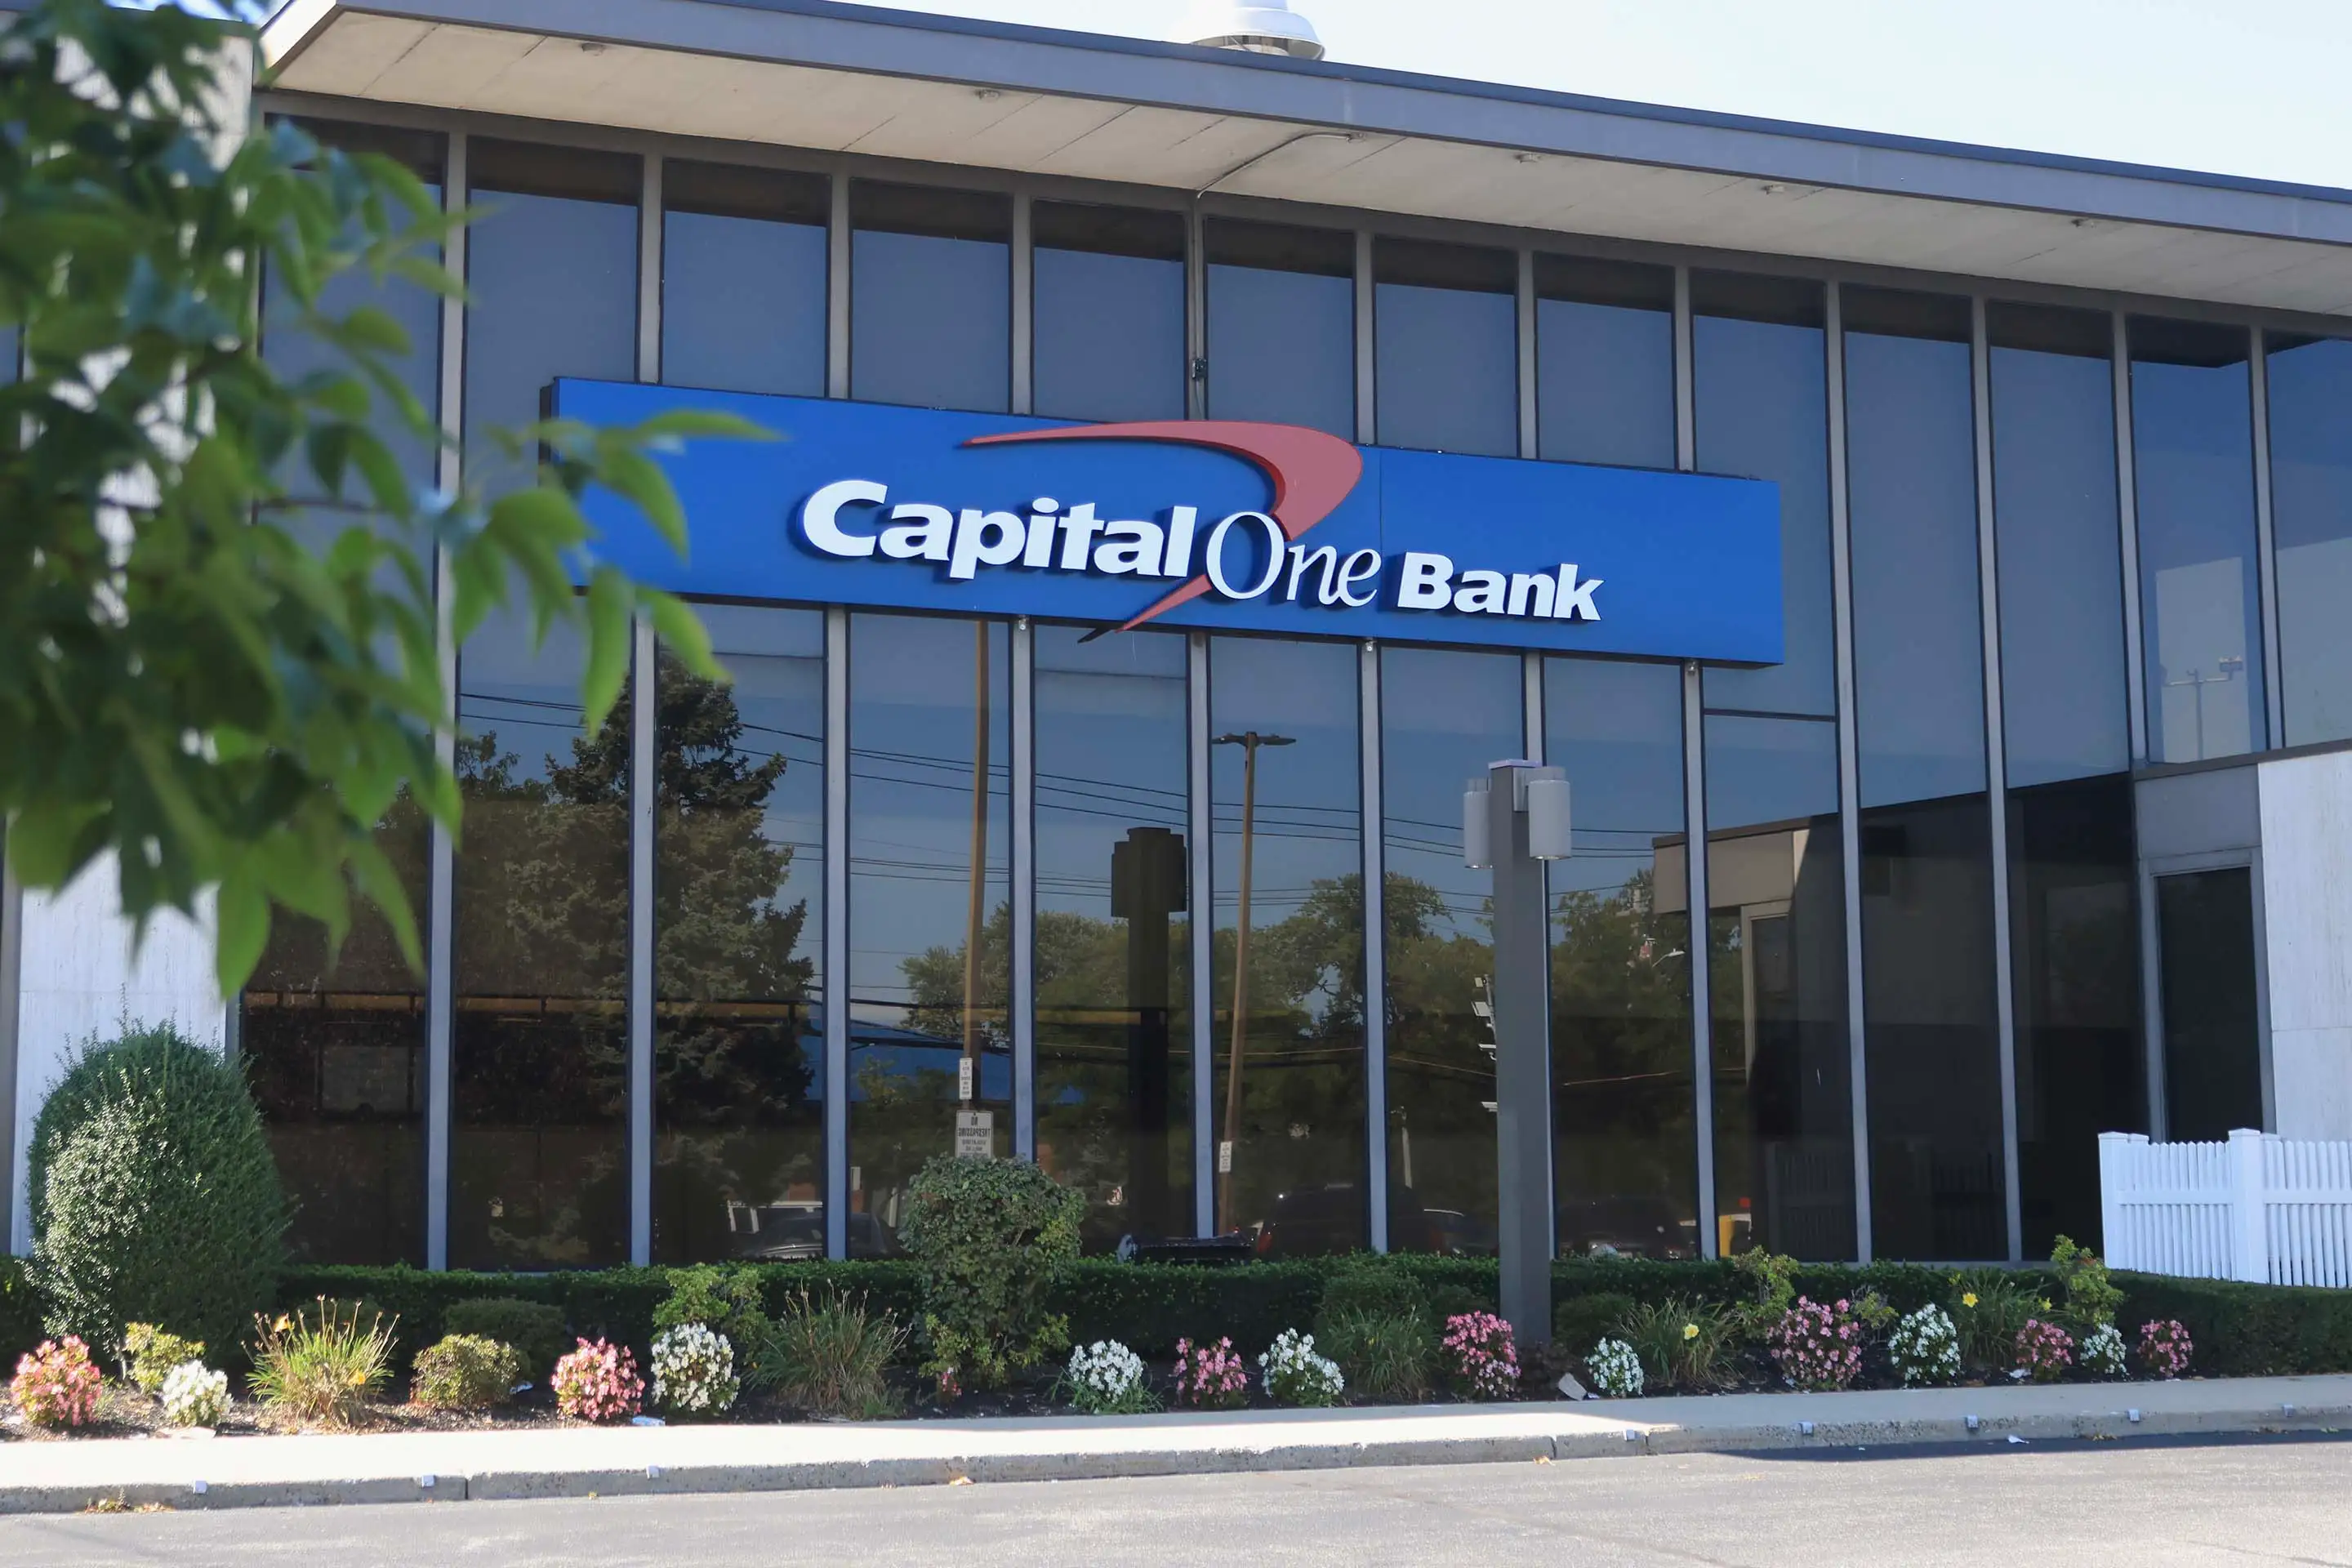 Capital One bank building